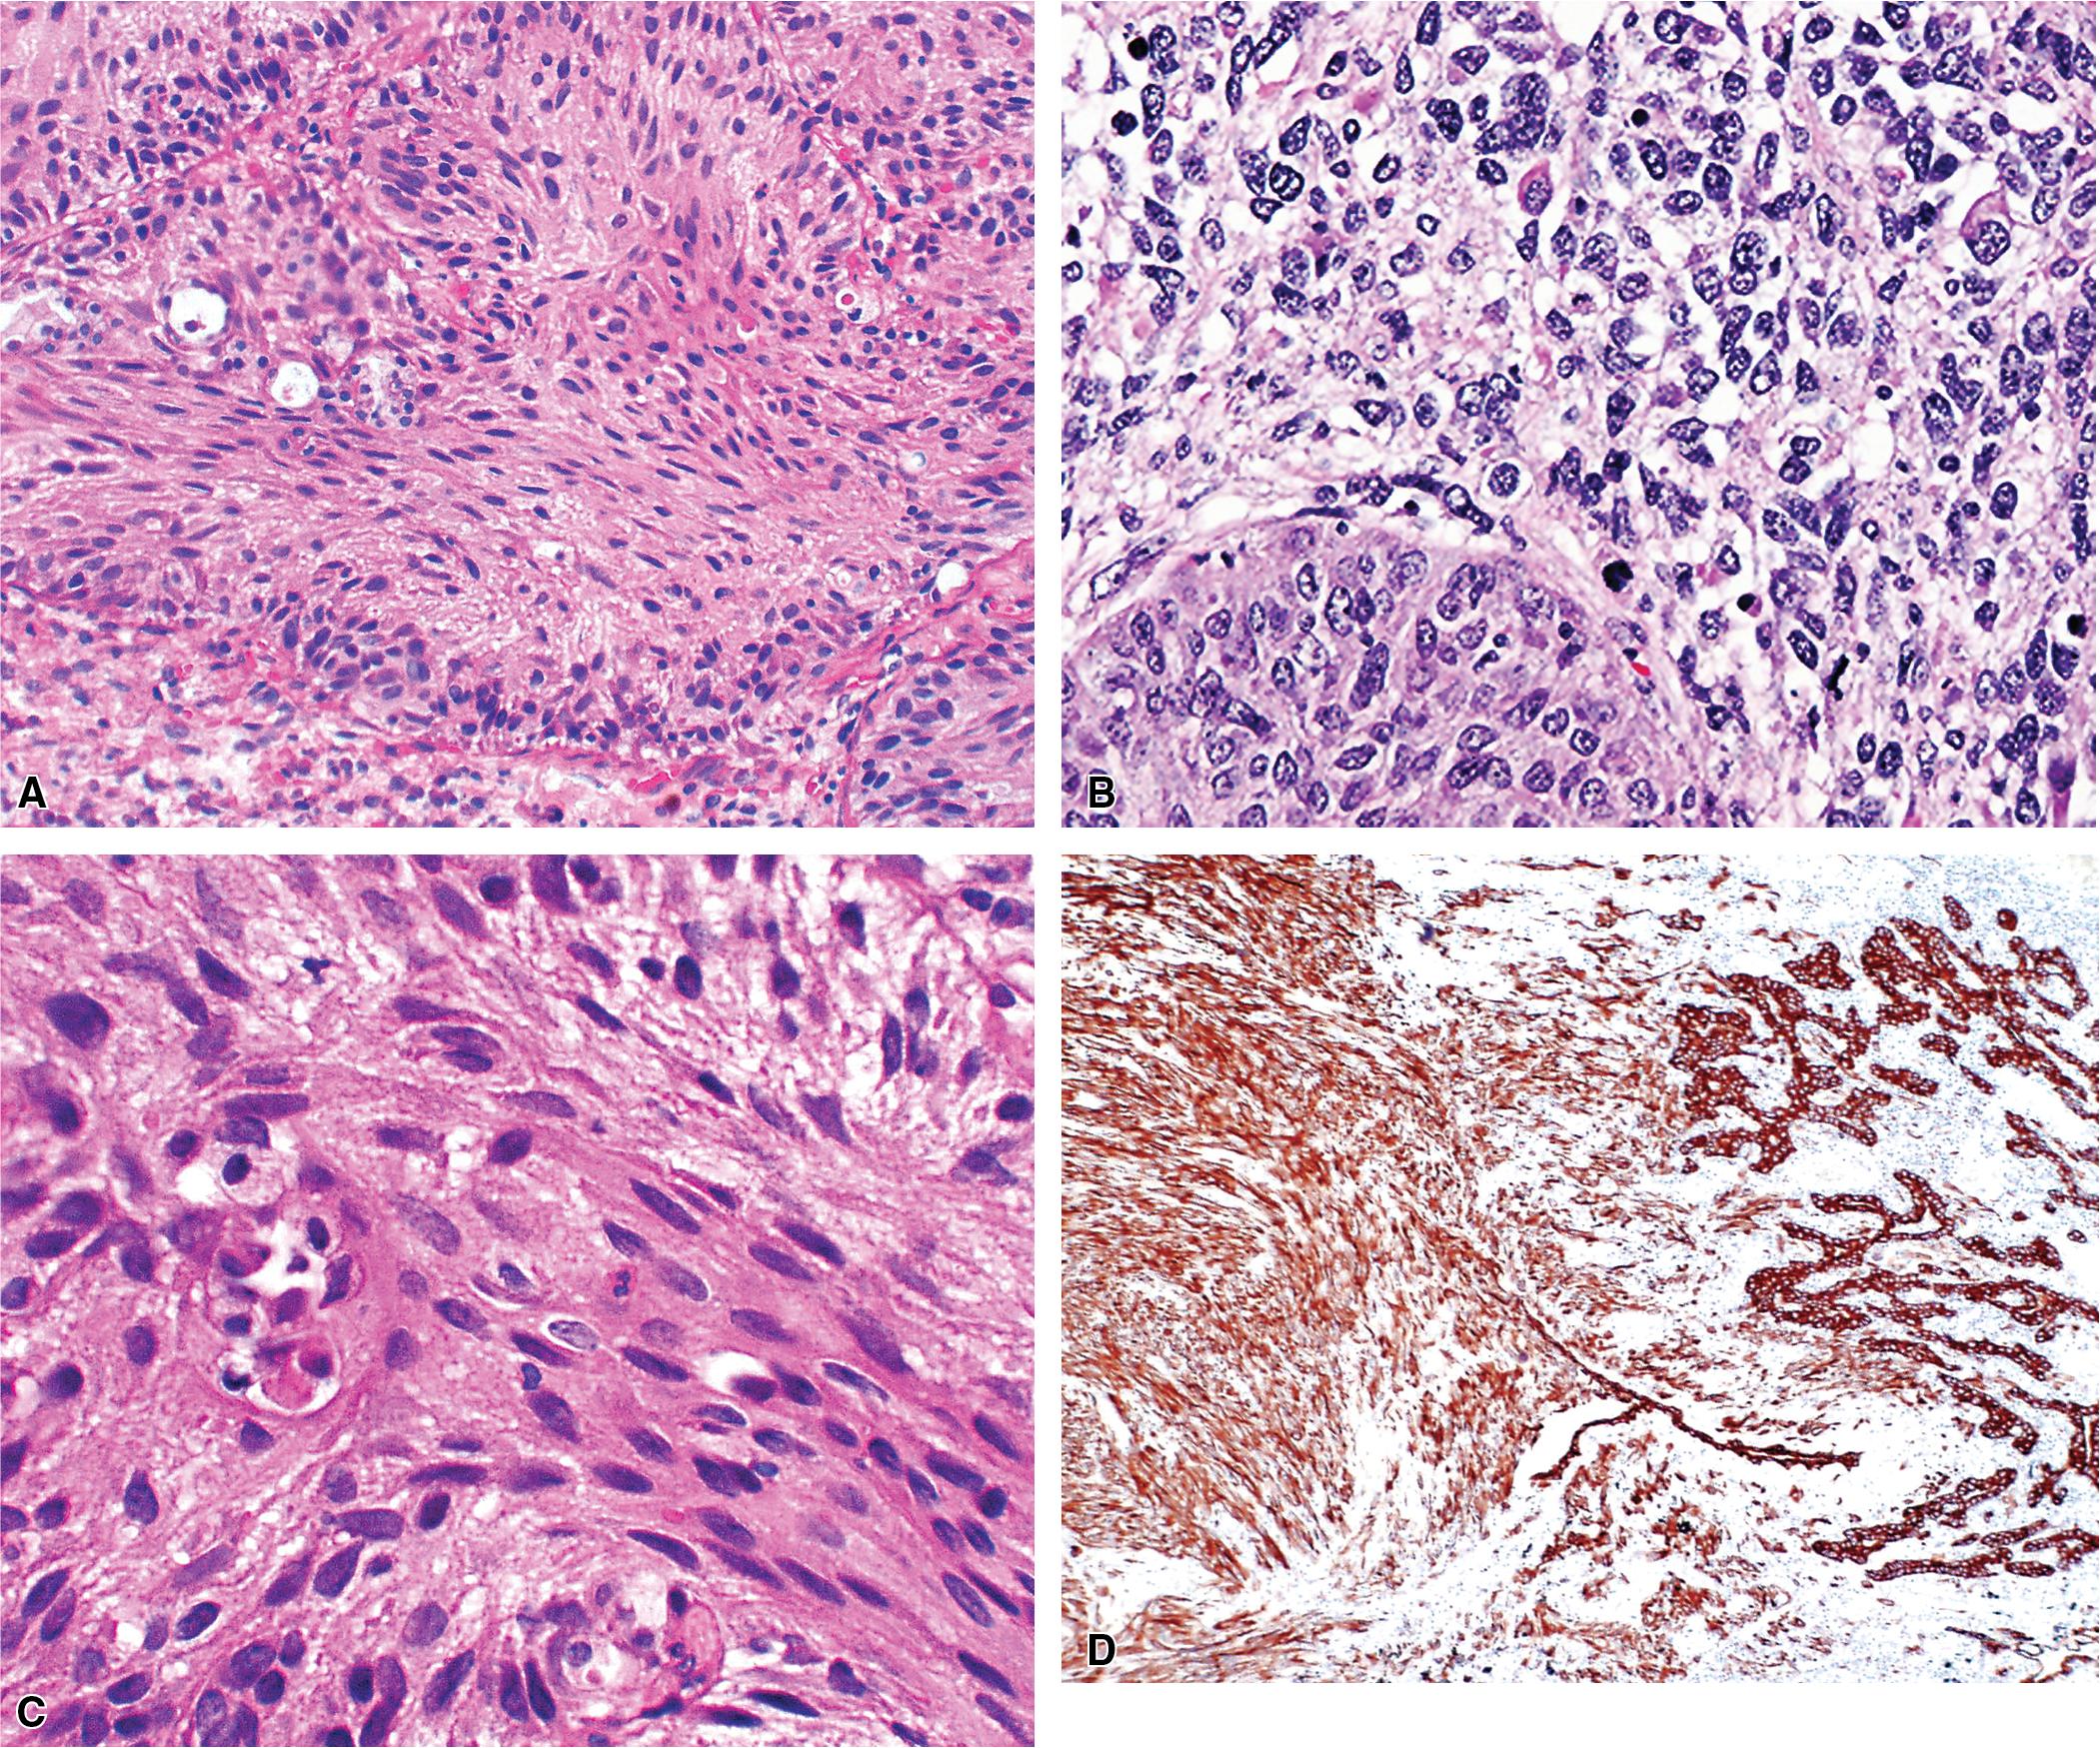 Figure 15.4, (A–C) Sarcomatoid carcinoma of the lung, showing overtly epithelial elements with an abrupt transition to malignant spindled or sarcoma-like elements (i.e., the “pleomorphic carcinoma” variant of sarcomatoid carcinoma). (D) Immunohistochemistry for keratin demonstrates reactivity in both neoplastic components.